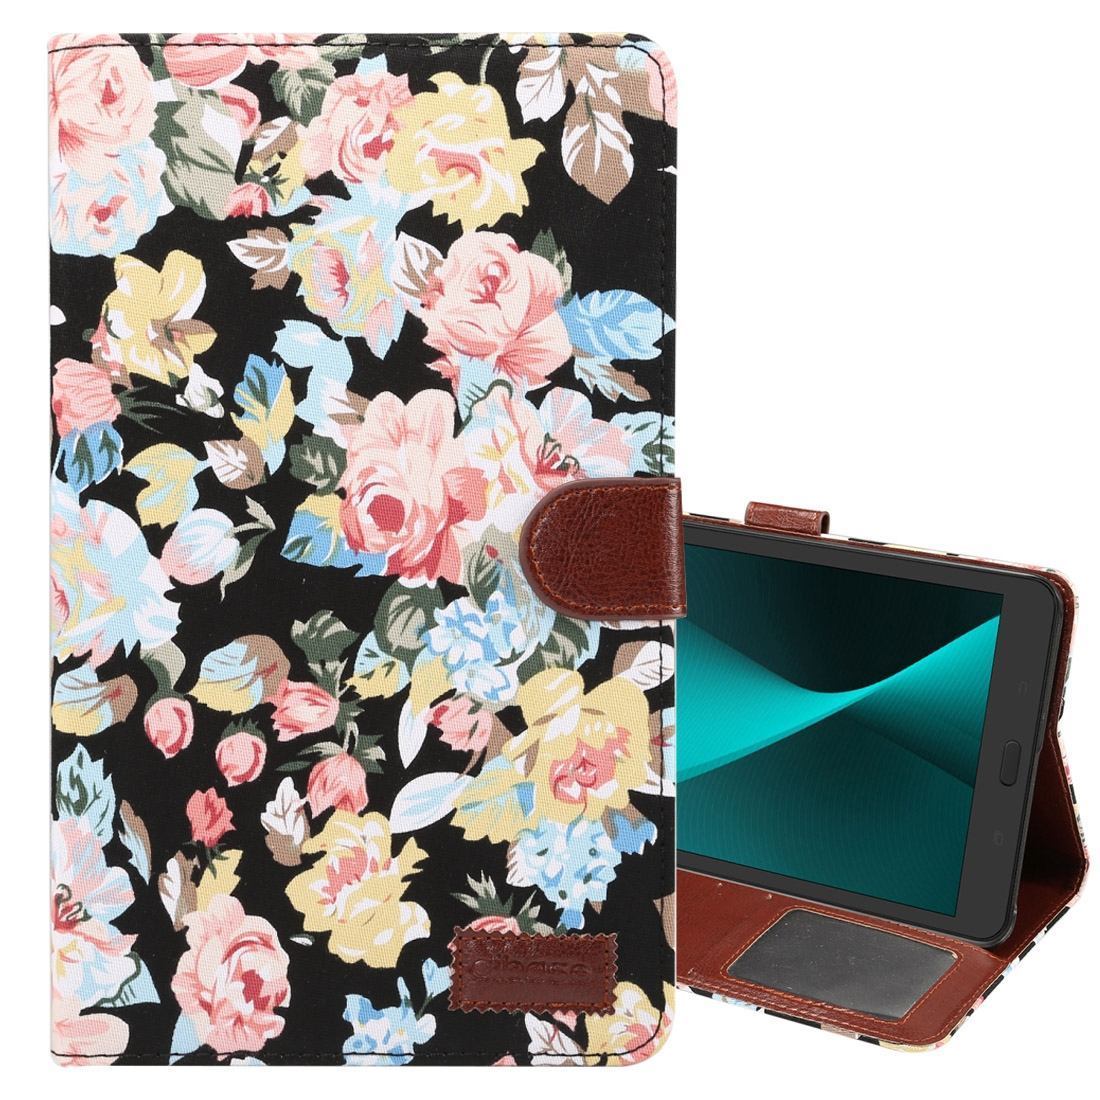 For Samsung Galaxy Tab A 8.0 SM-T380,SM-T385 Case,Flower Cloth Leather Cover